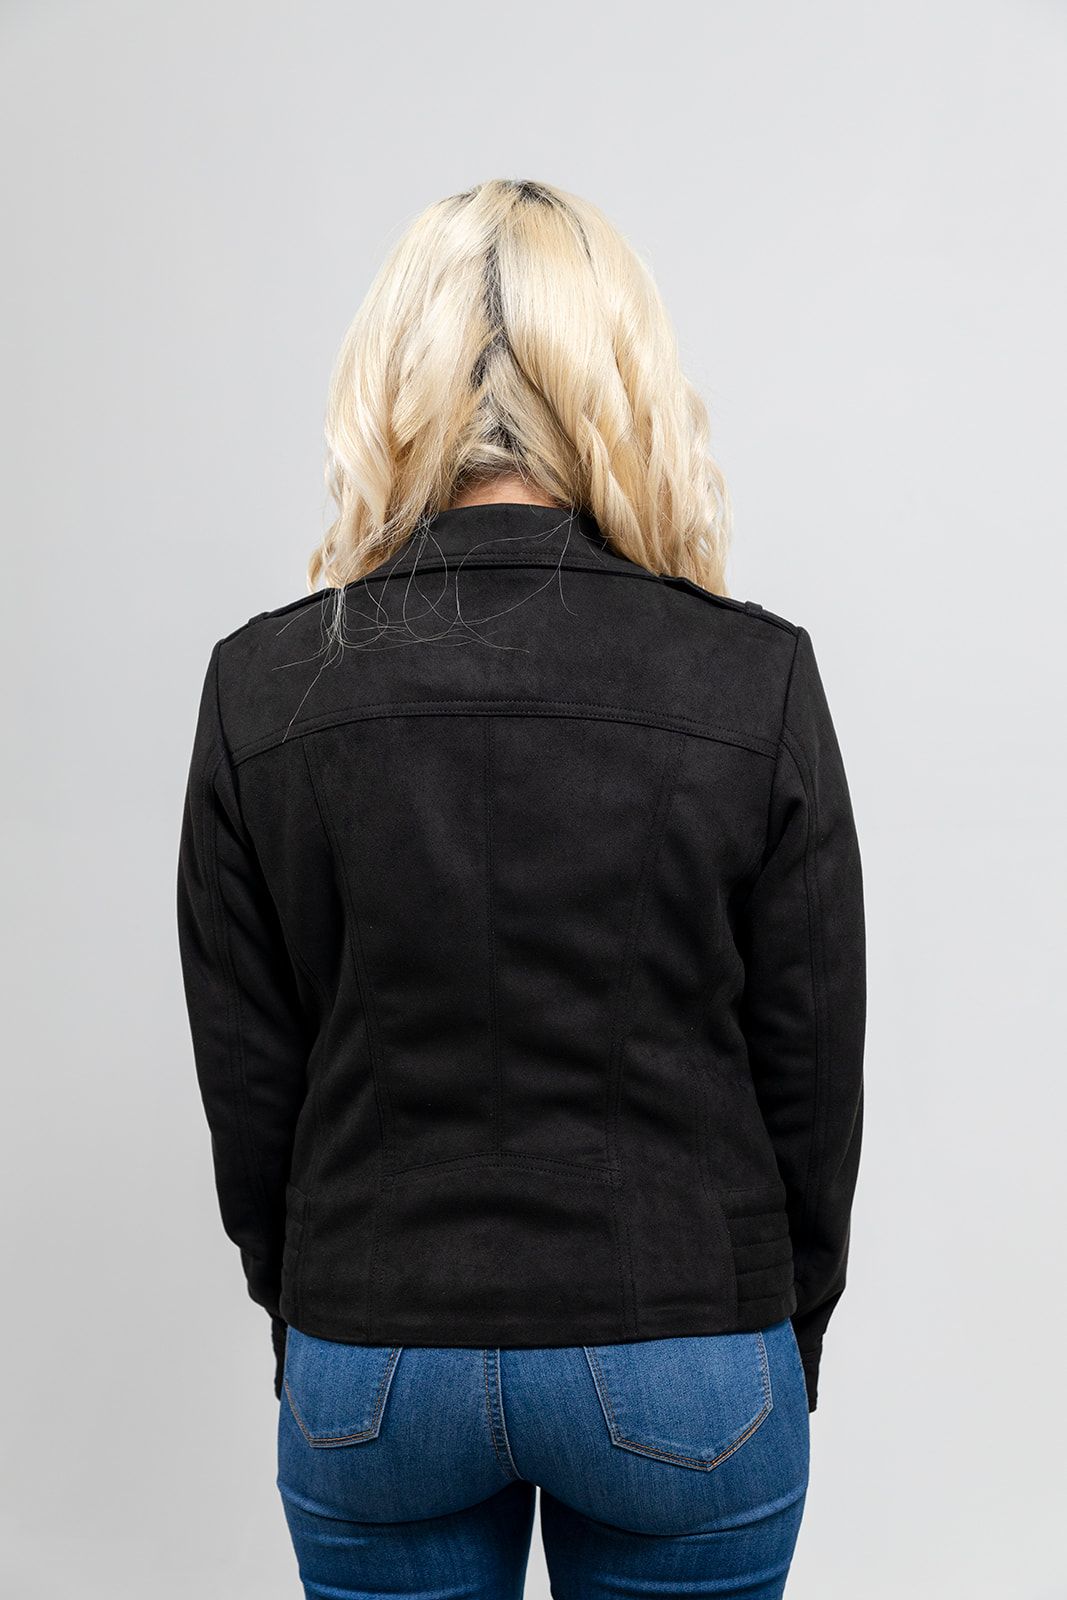 The back view of a woman wearing jeans and the First Manufacturing Molly - Women's Leather Jacket with horizontal zipper pockets.